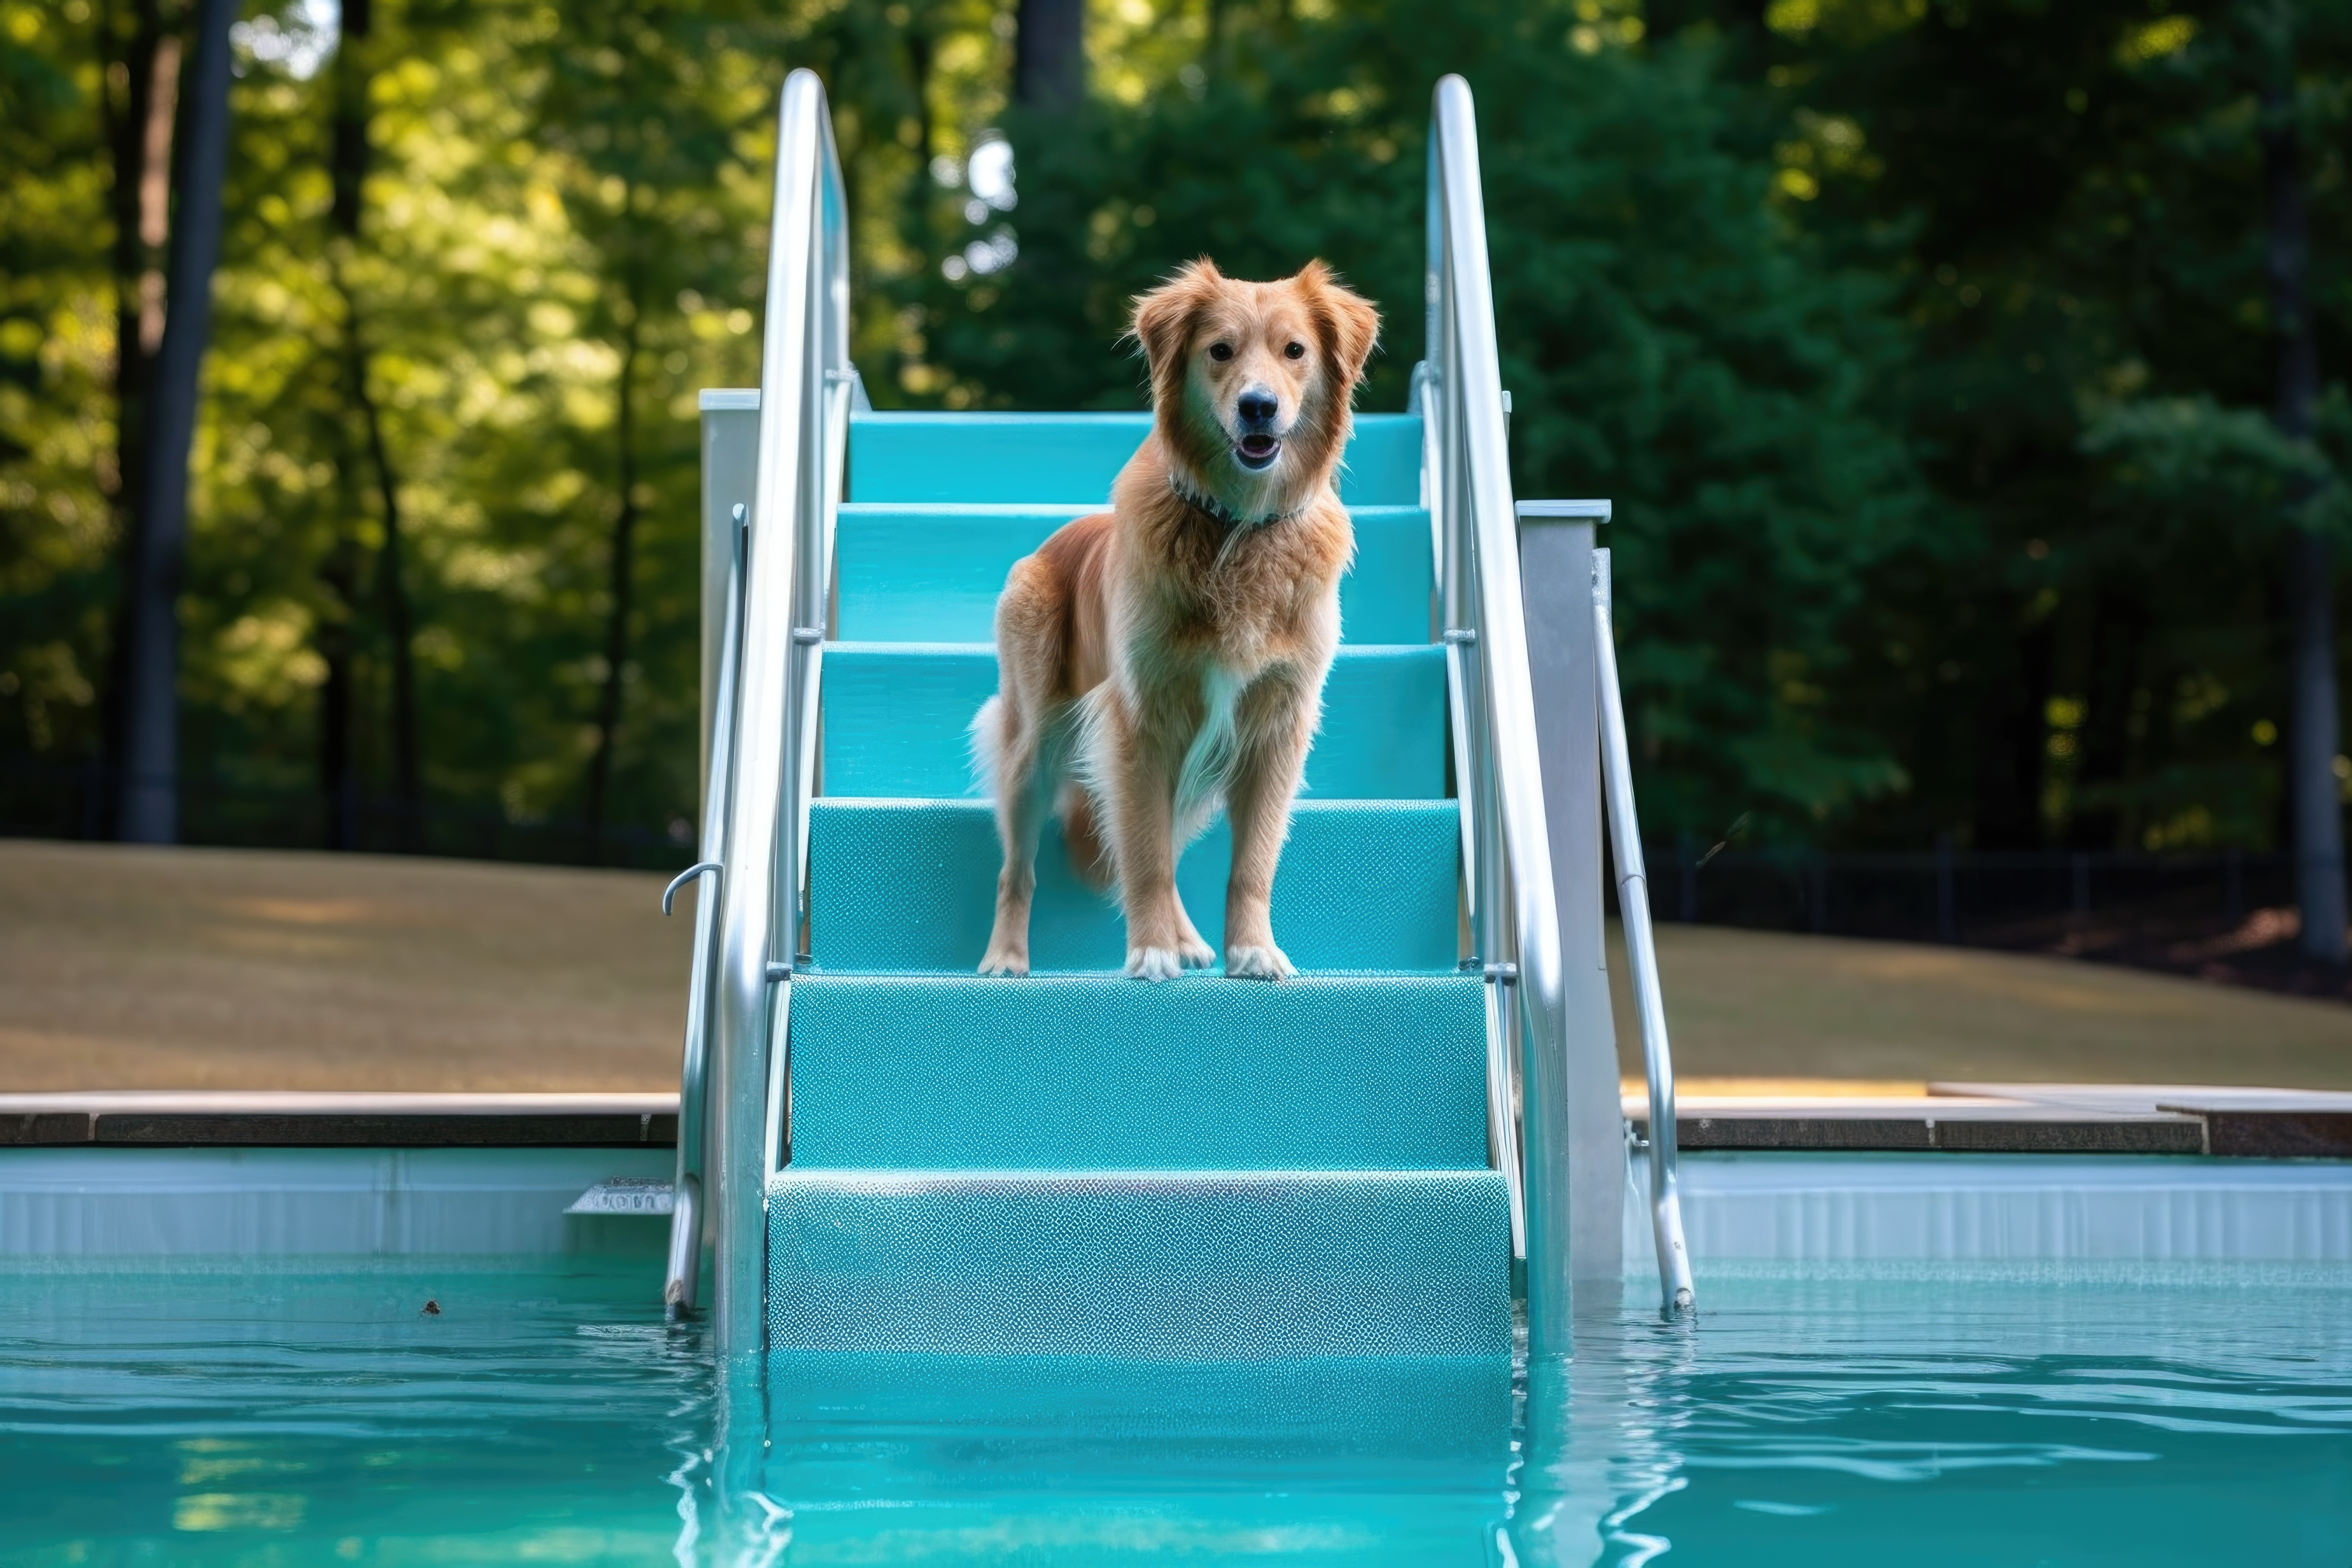 dog standing on above ground pool steps submerged in pool located in backyard